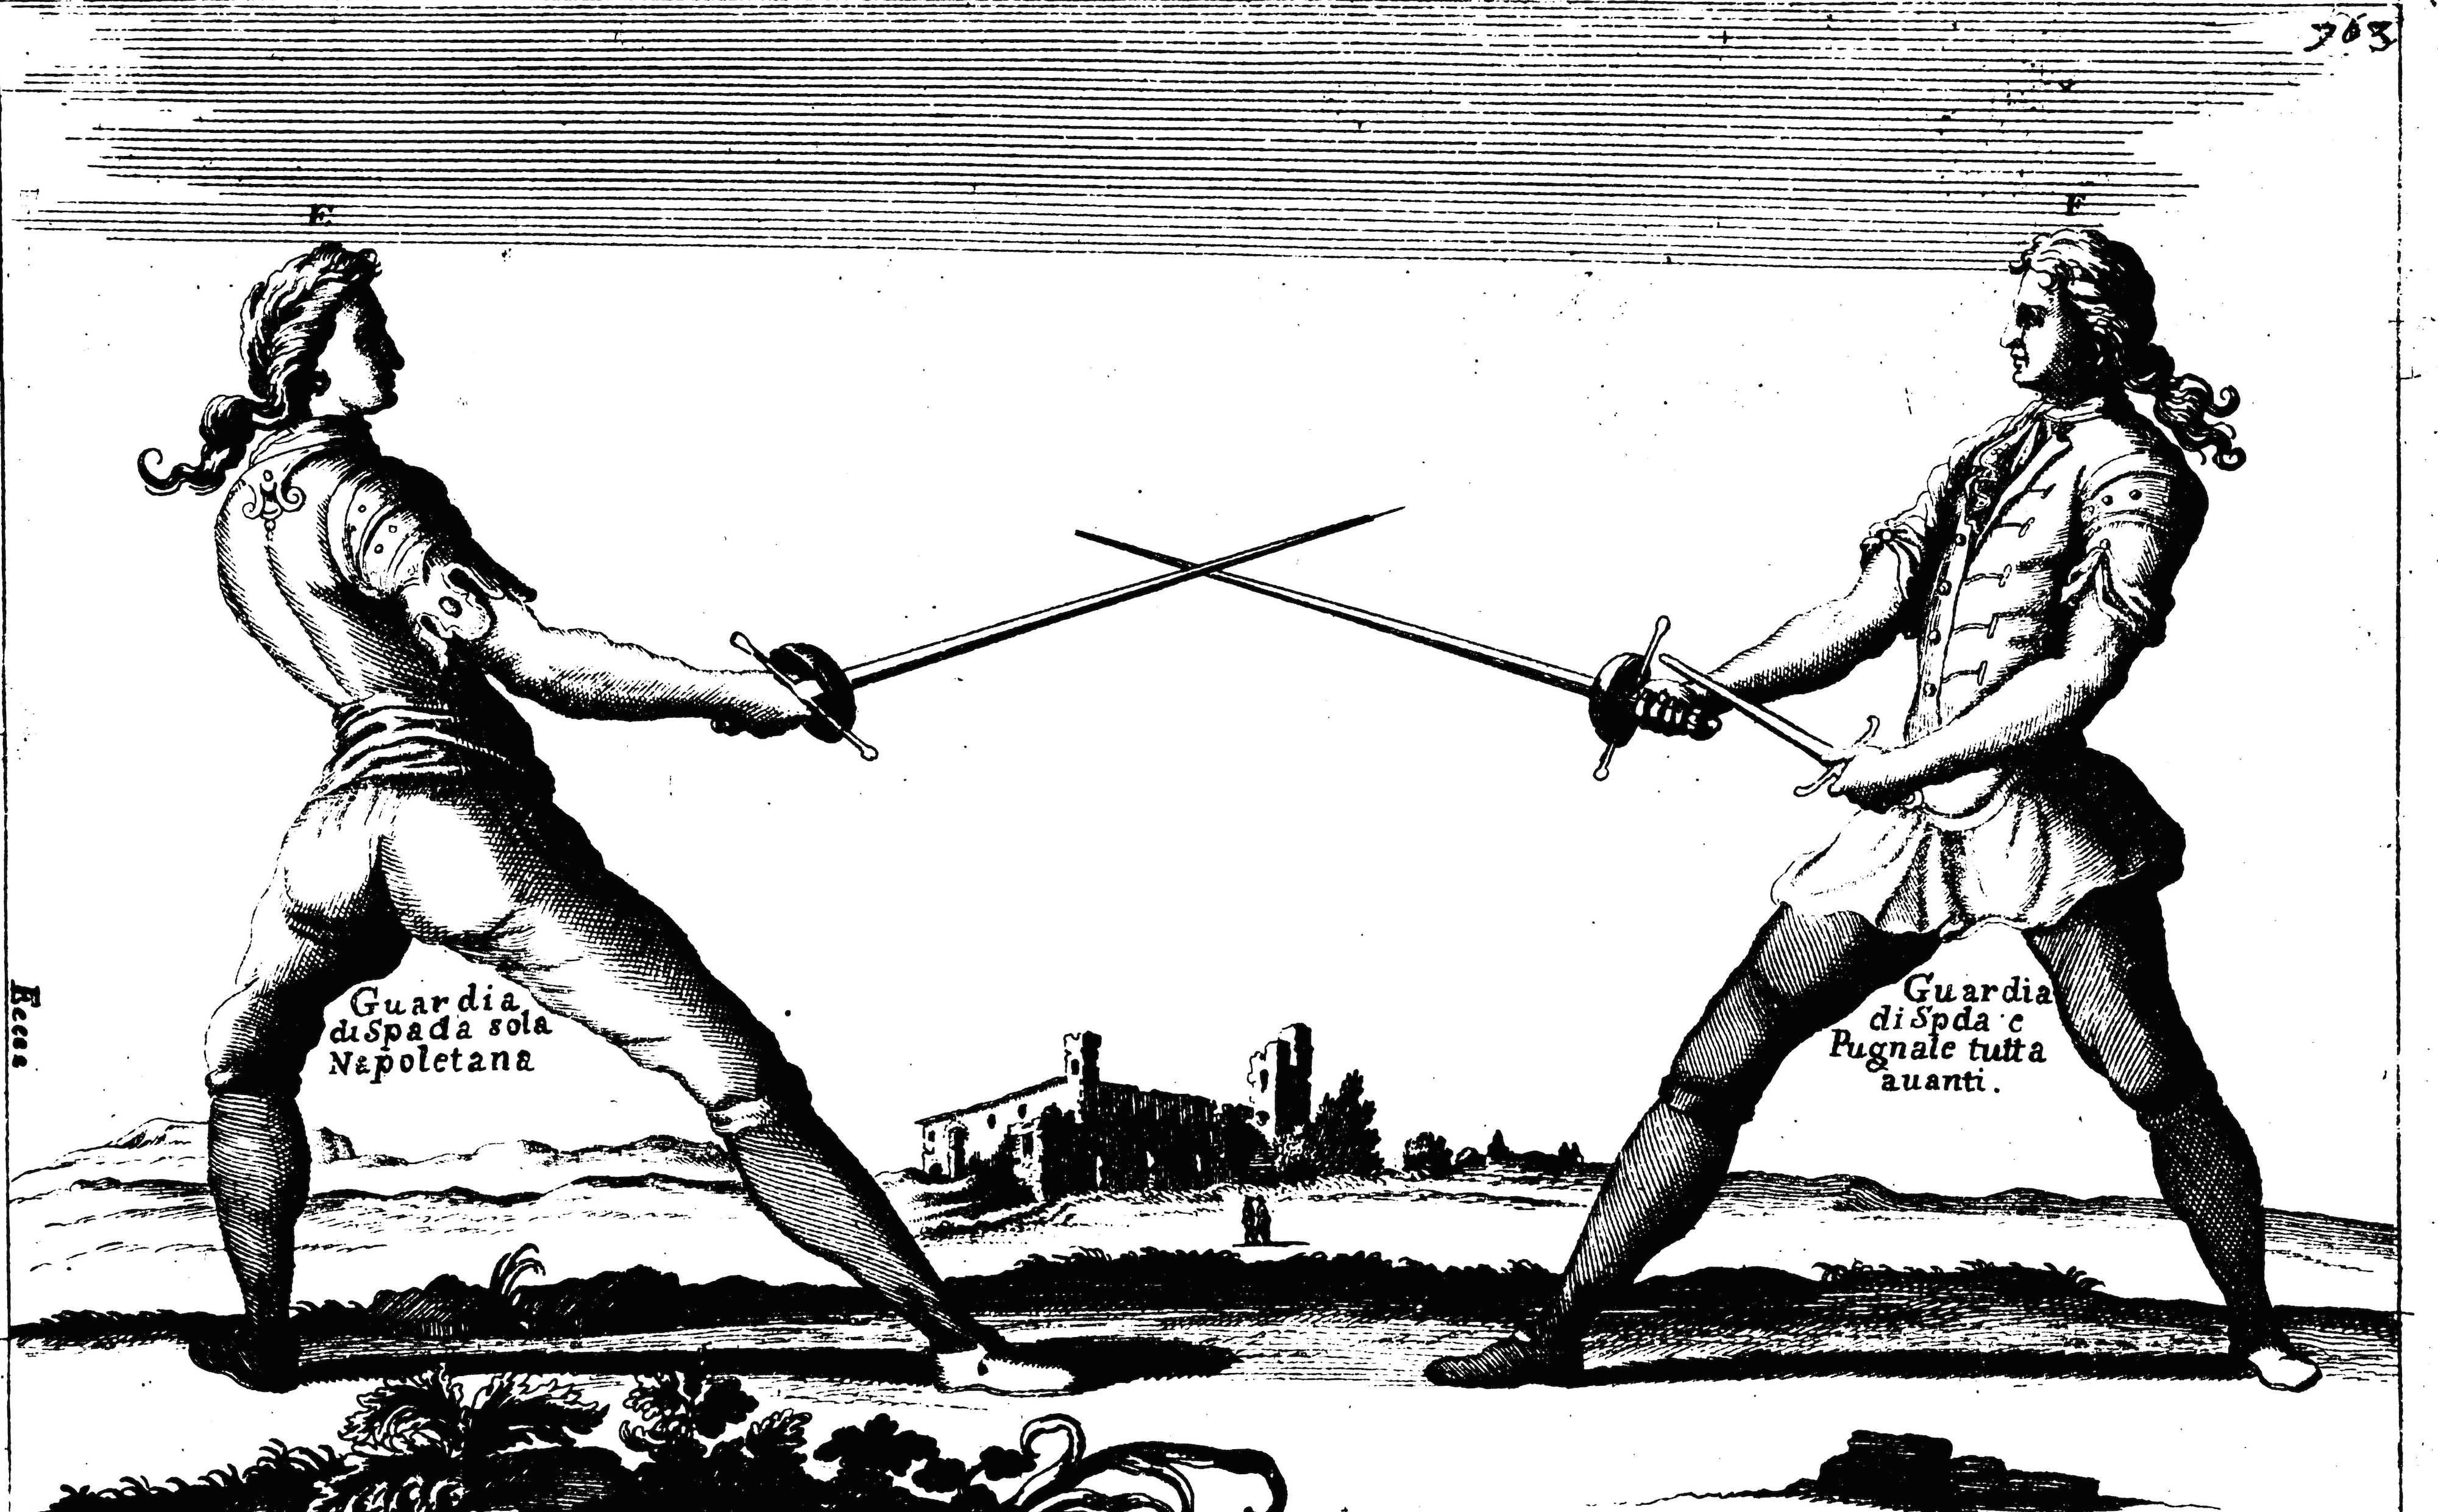 Fig. 7. Giuseppe D’Alessandro’s treatise of 1723, Opera, depicting cup-hilt rapiers.